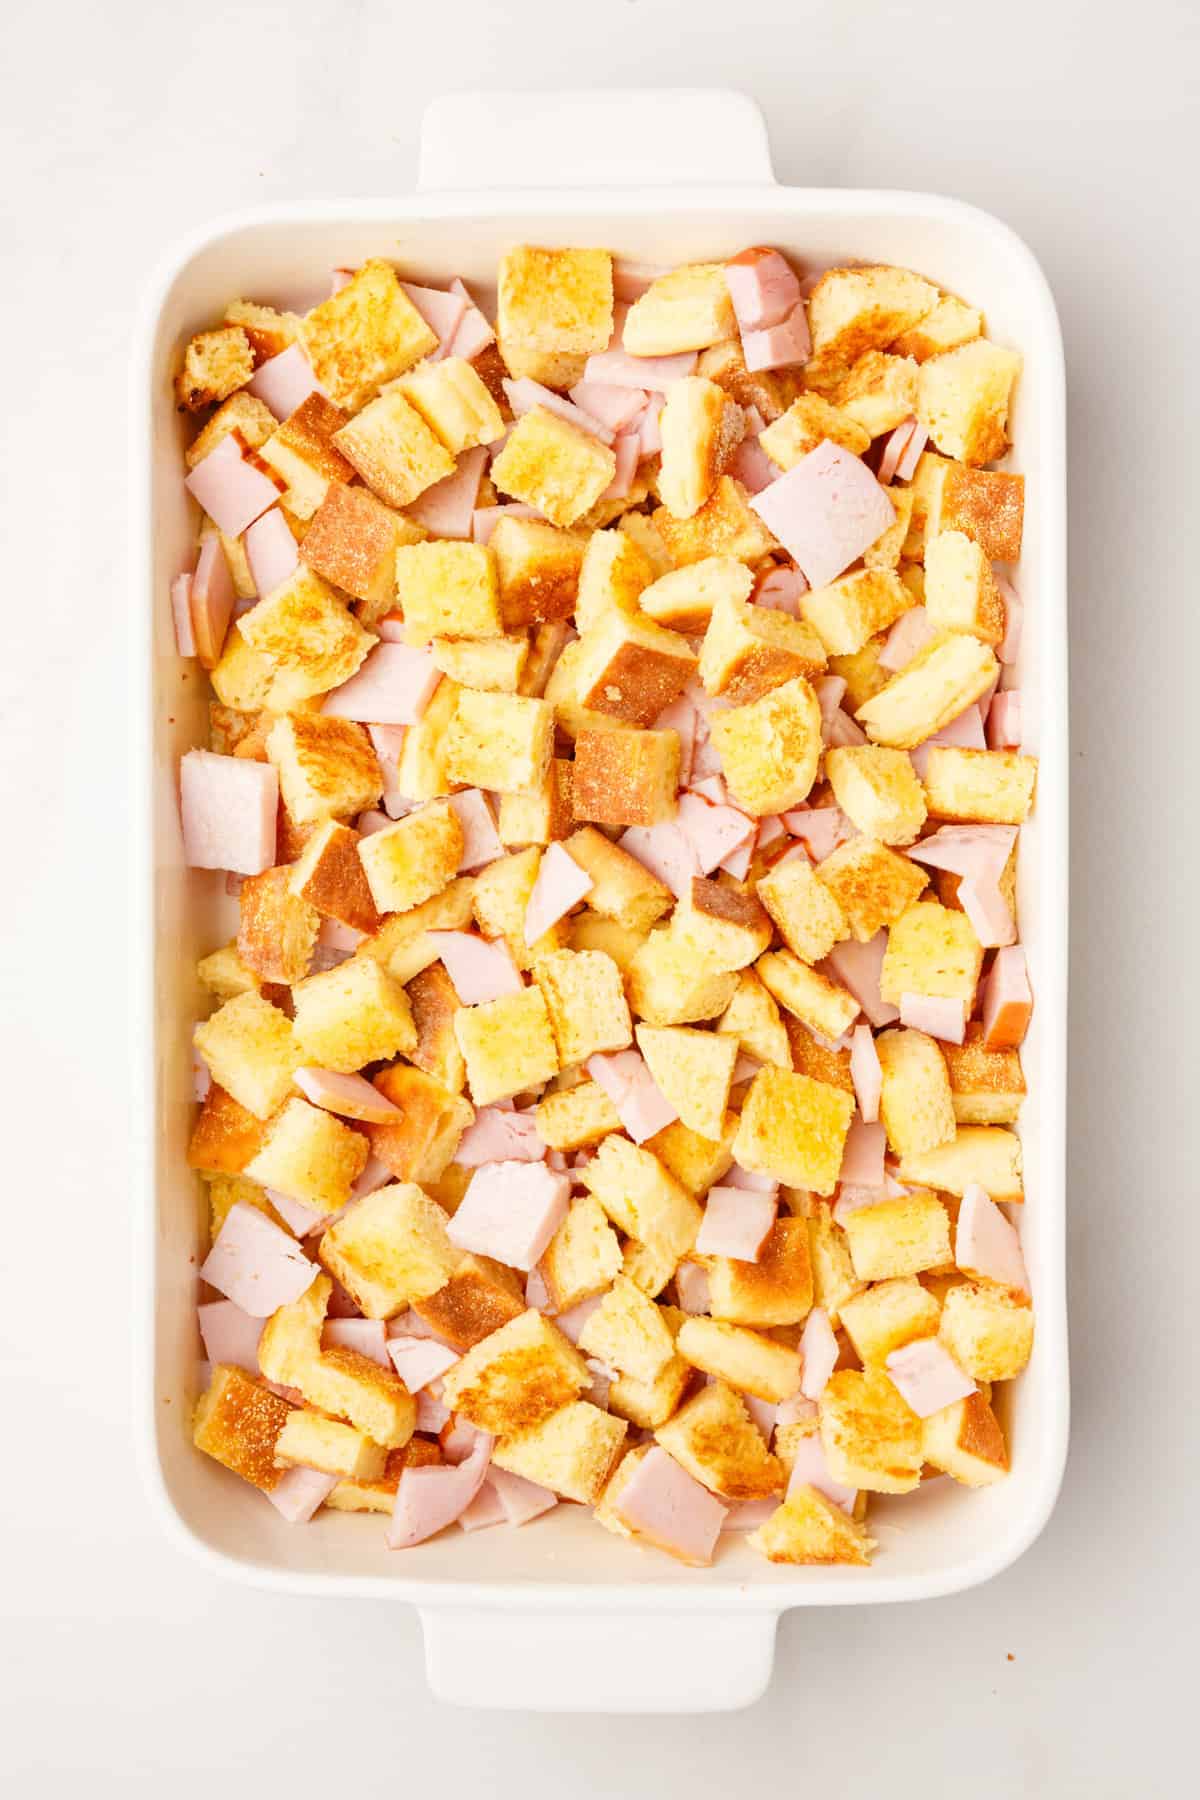 chopped canadian bacon pieces and  cubed english muffin pieces in a 9x13 casserole dish. 